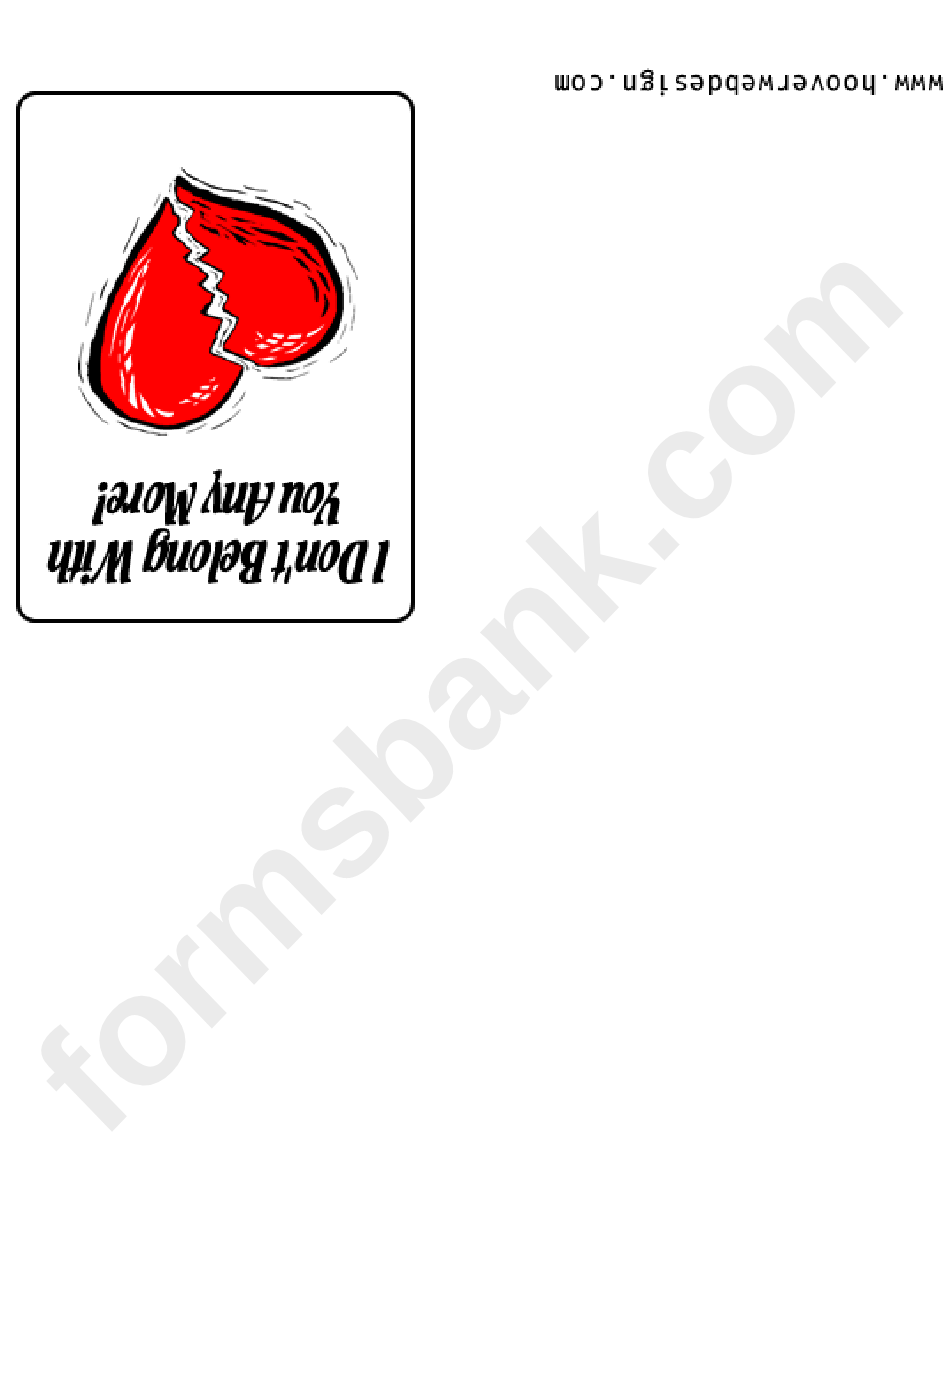 I Dont Belong With You Any More - Broken Heart Card Template